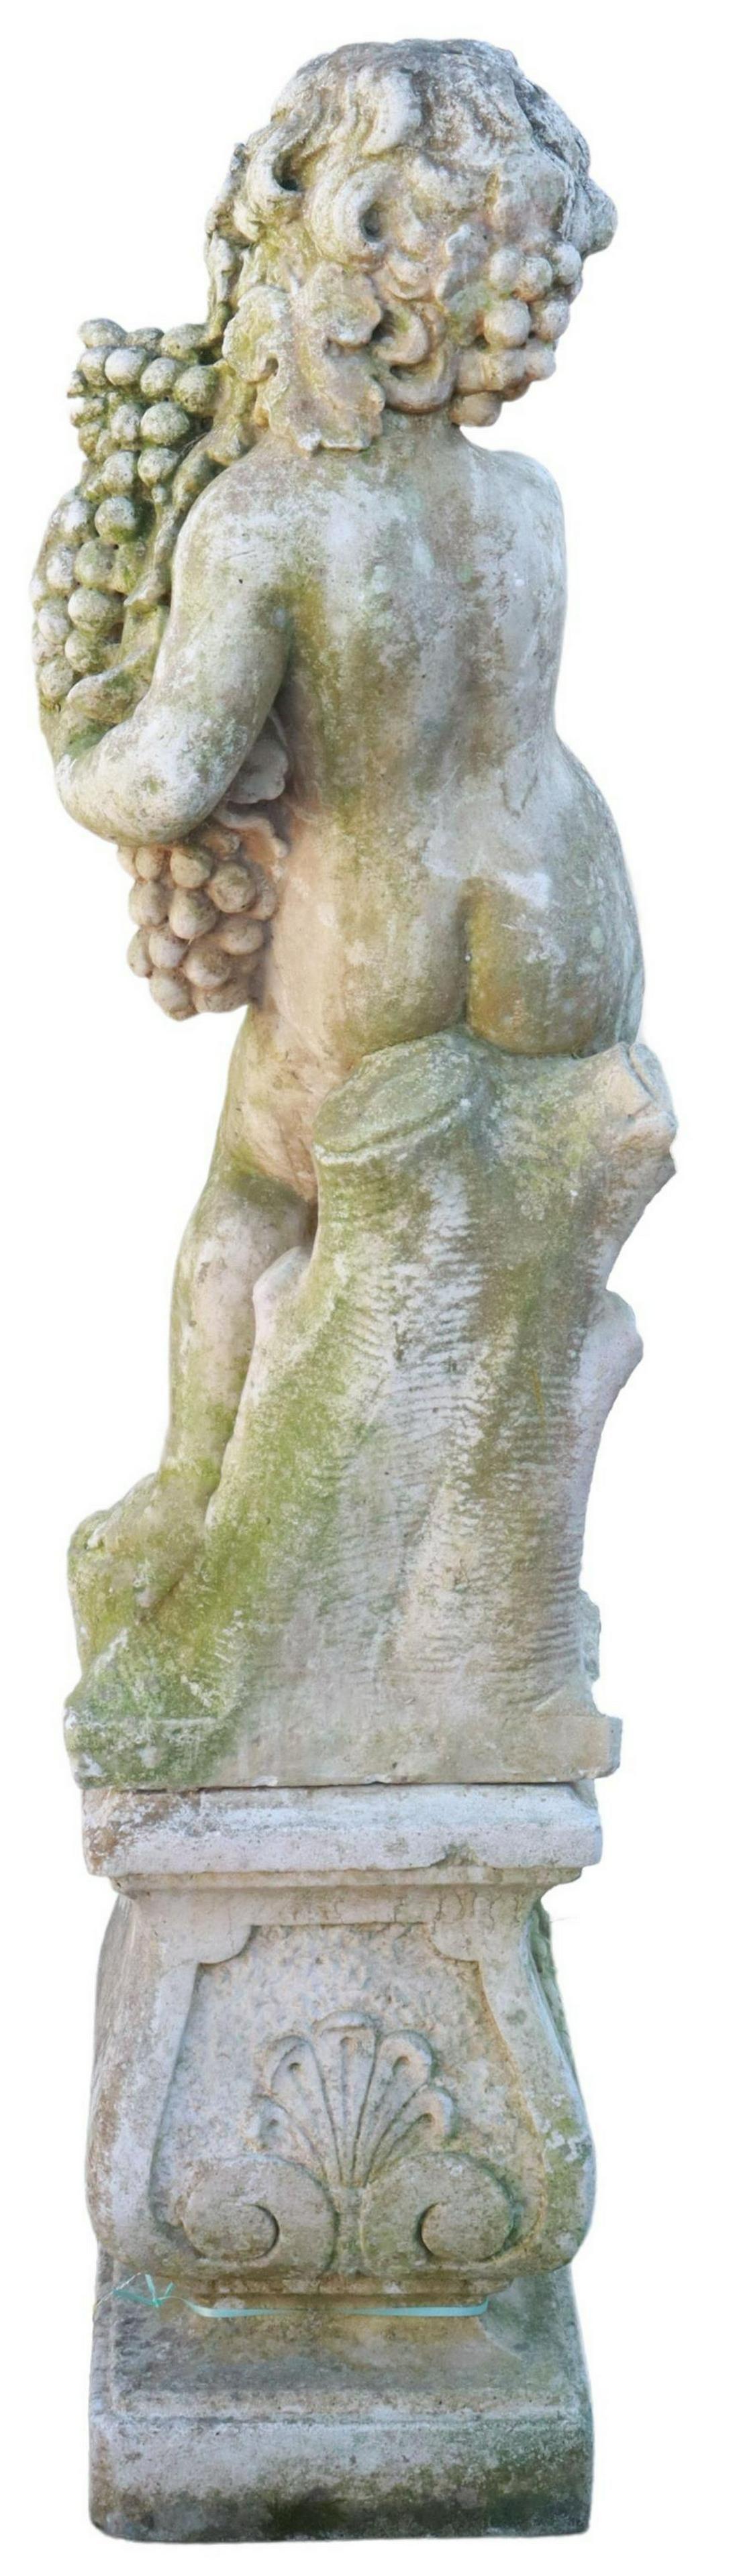 French Provincial French Cast Stone Putto Garden Sculpture For Sale